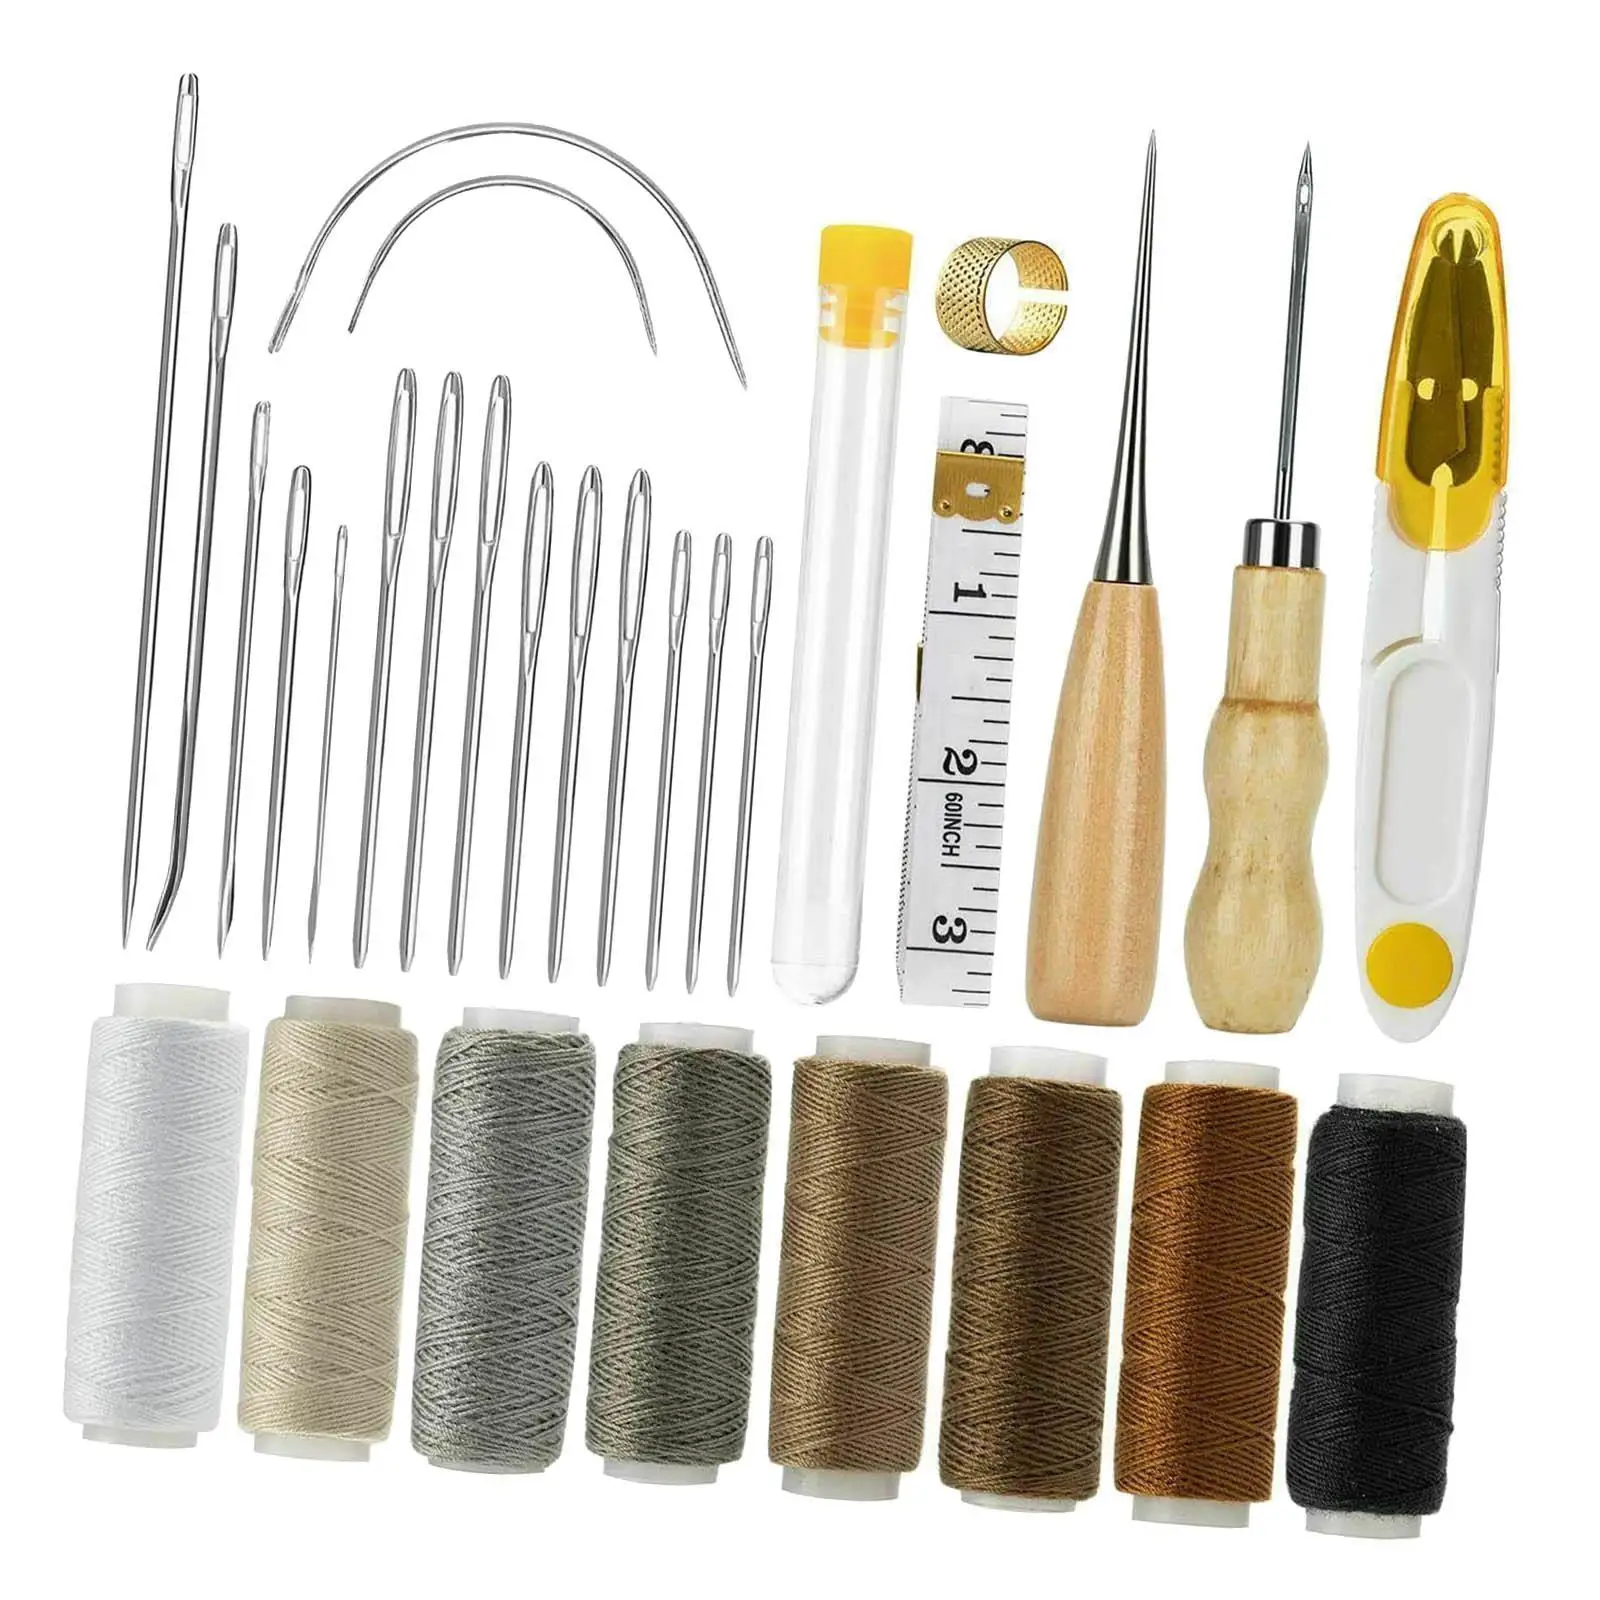 29Pcs Leather Craft Sewing Leather Work Tools Set Leathercraft Accessories